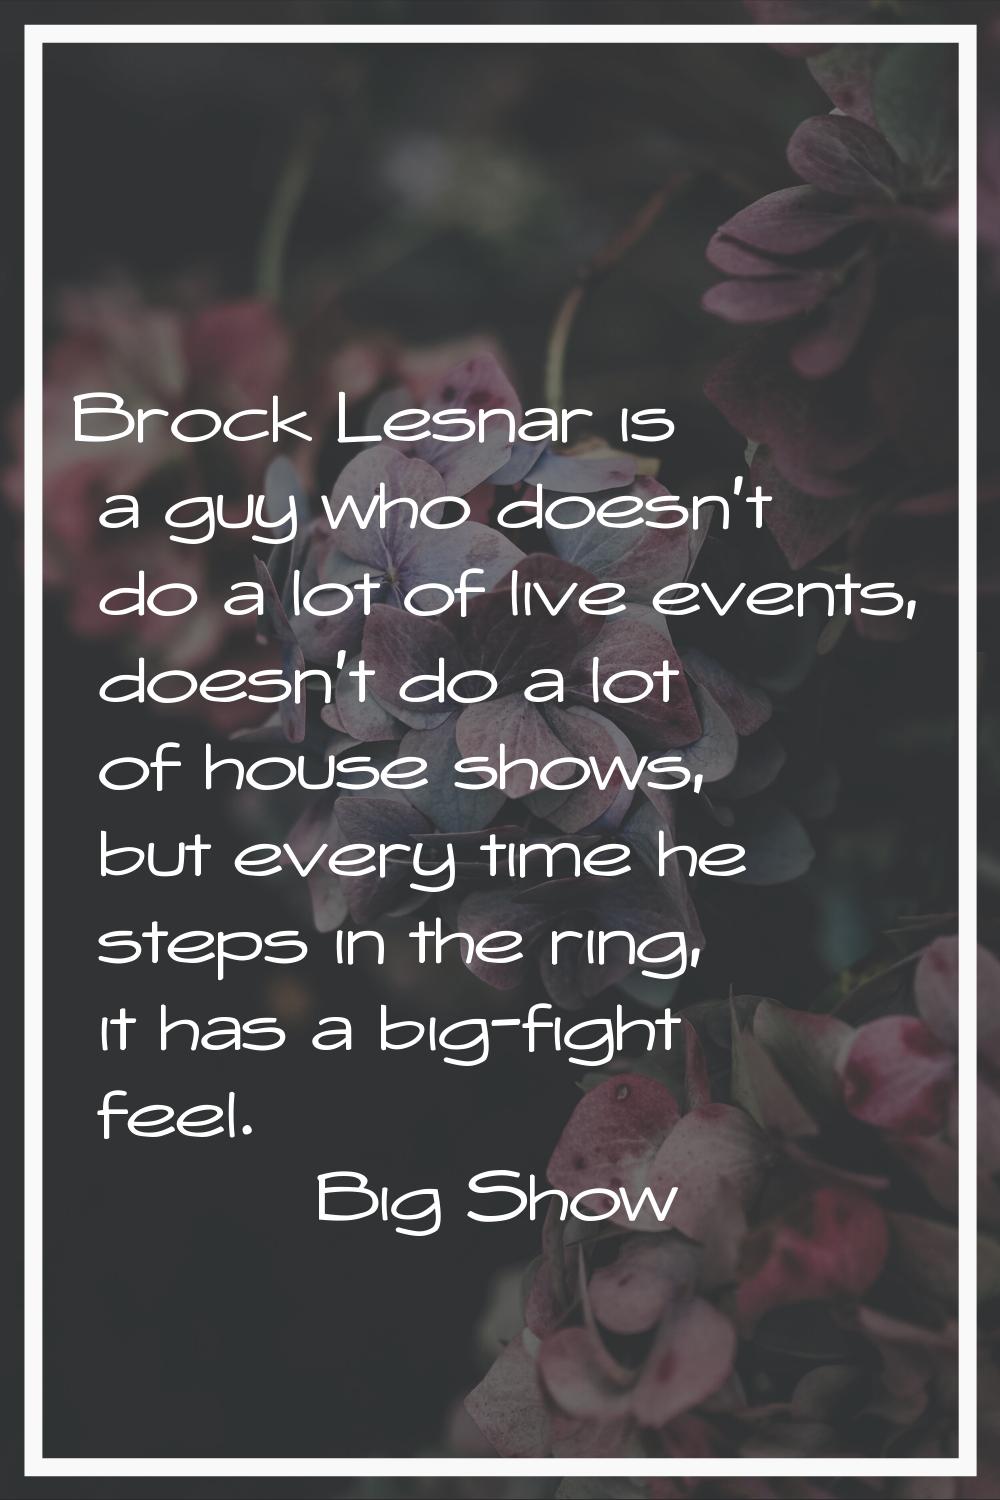 Brock Lesnar is a guy who doesn't do a lot of live events, doesn't do a lot of house shows, but eve